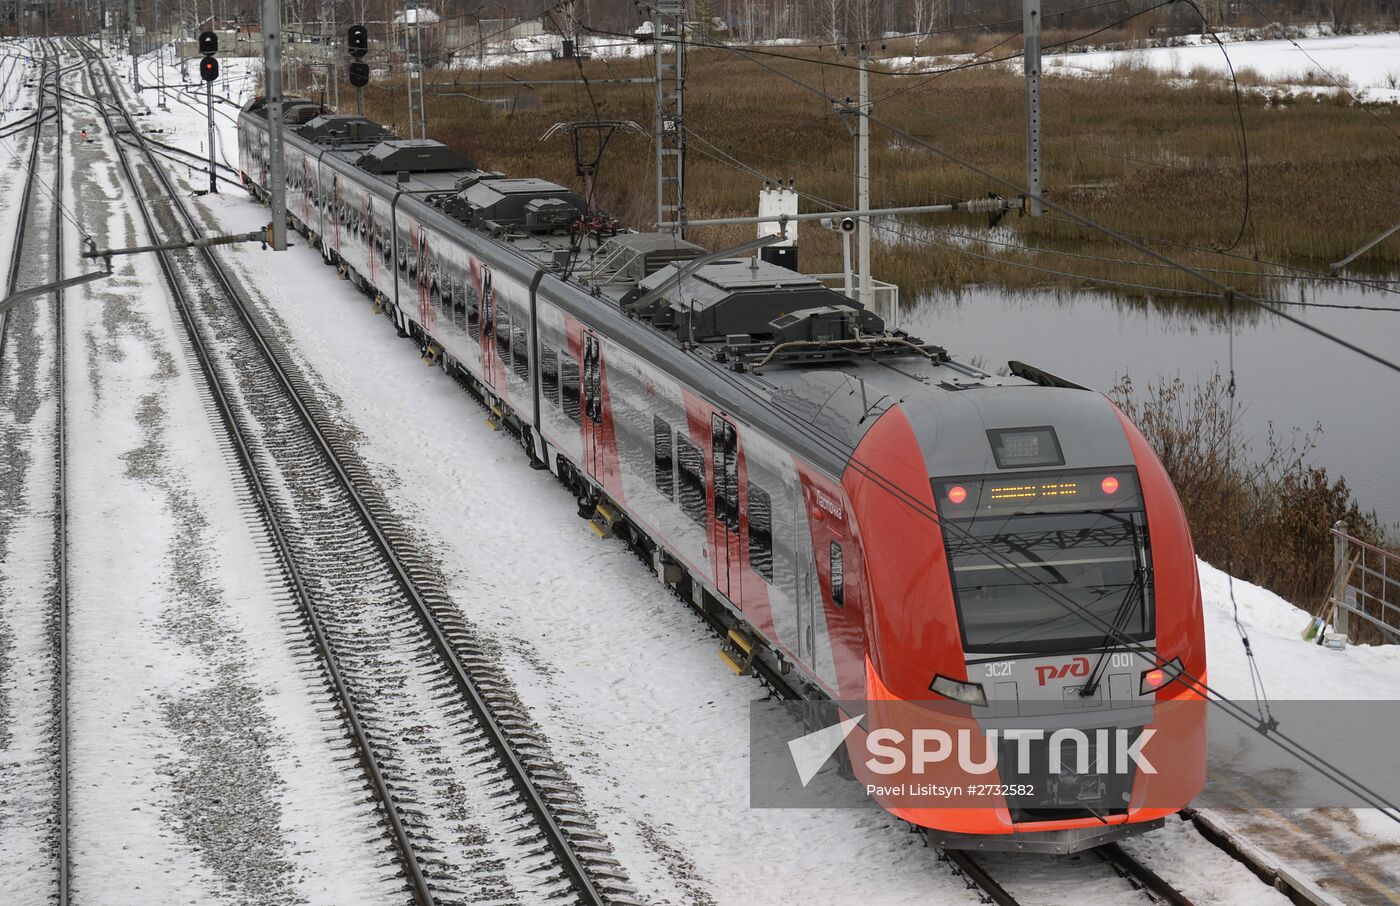 Lastochka high-speed trains launched between Yekaterinburg and Nizhny Tagil